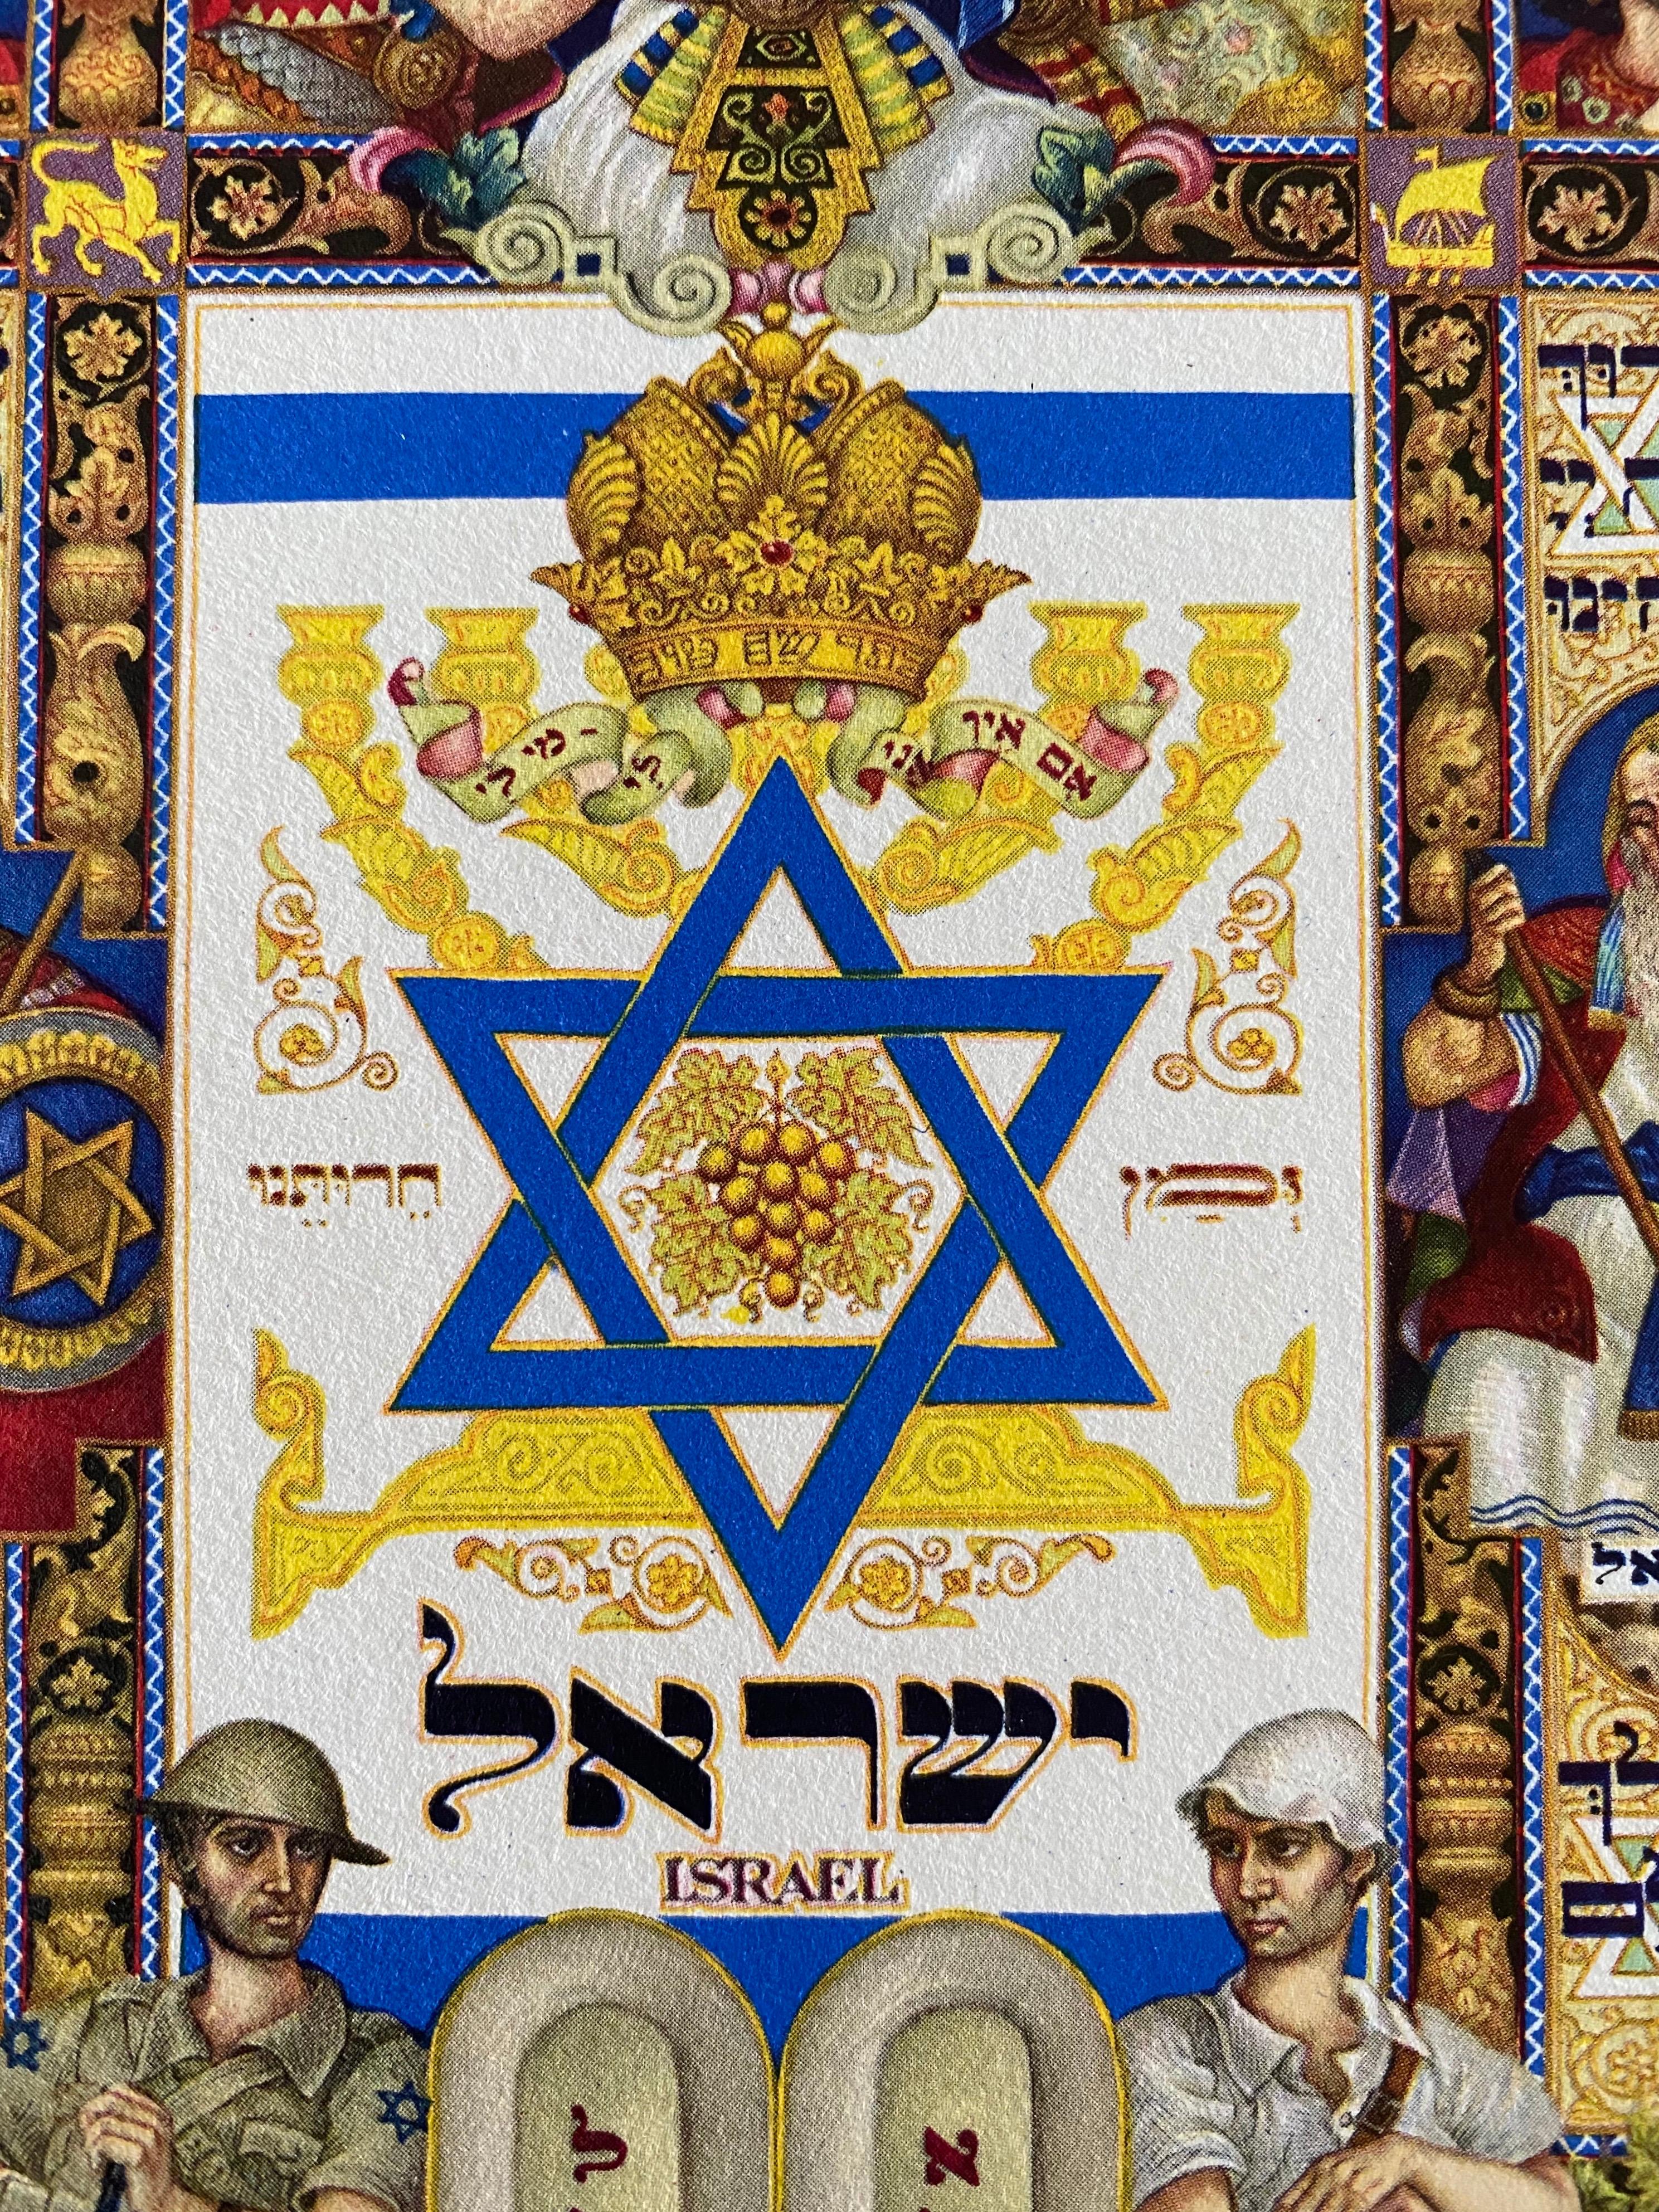 
ARTHUR SZYK 1894-1951
Lodz, Poland 1894 - 1951 New Canaan, Connecticut (Polish/American)
signed in plate by artist l.r.

Arthur Szyk is renowned for The Szyk Haggadah which was described by the London Times as 